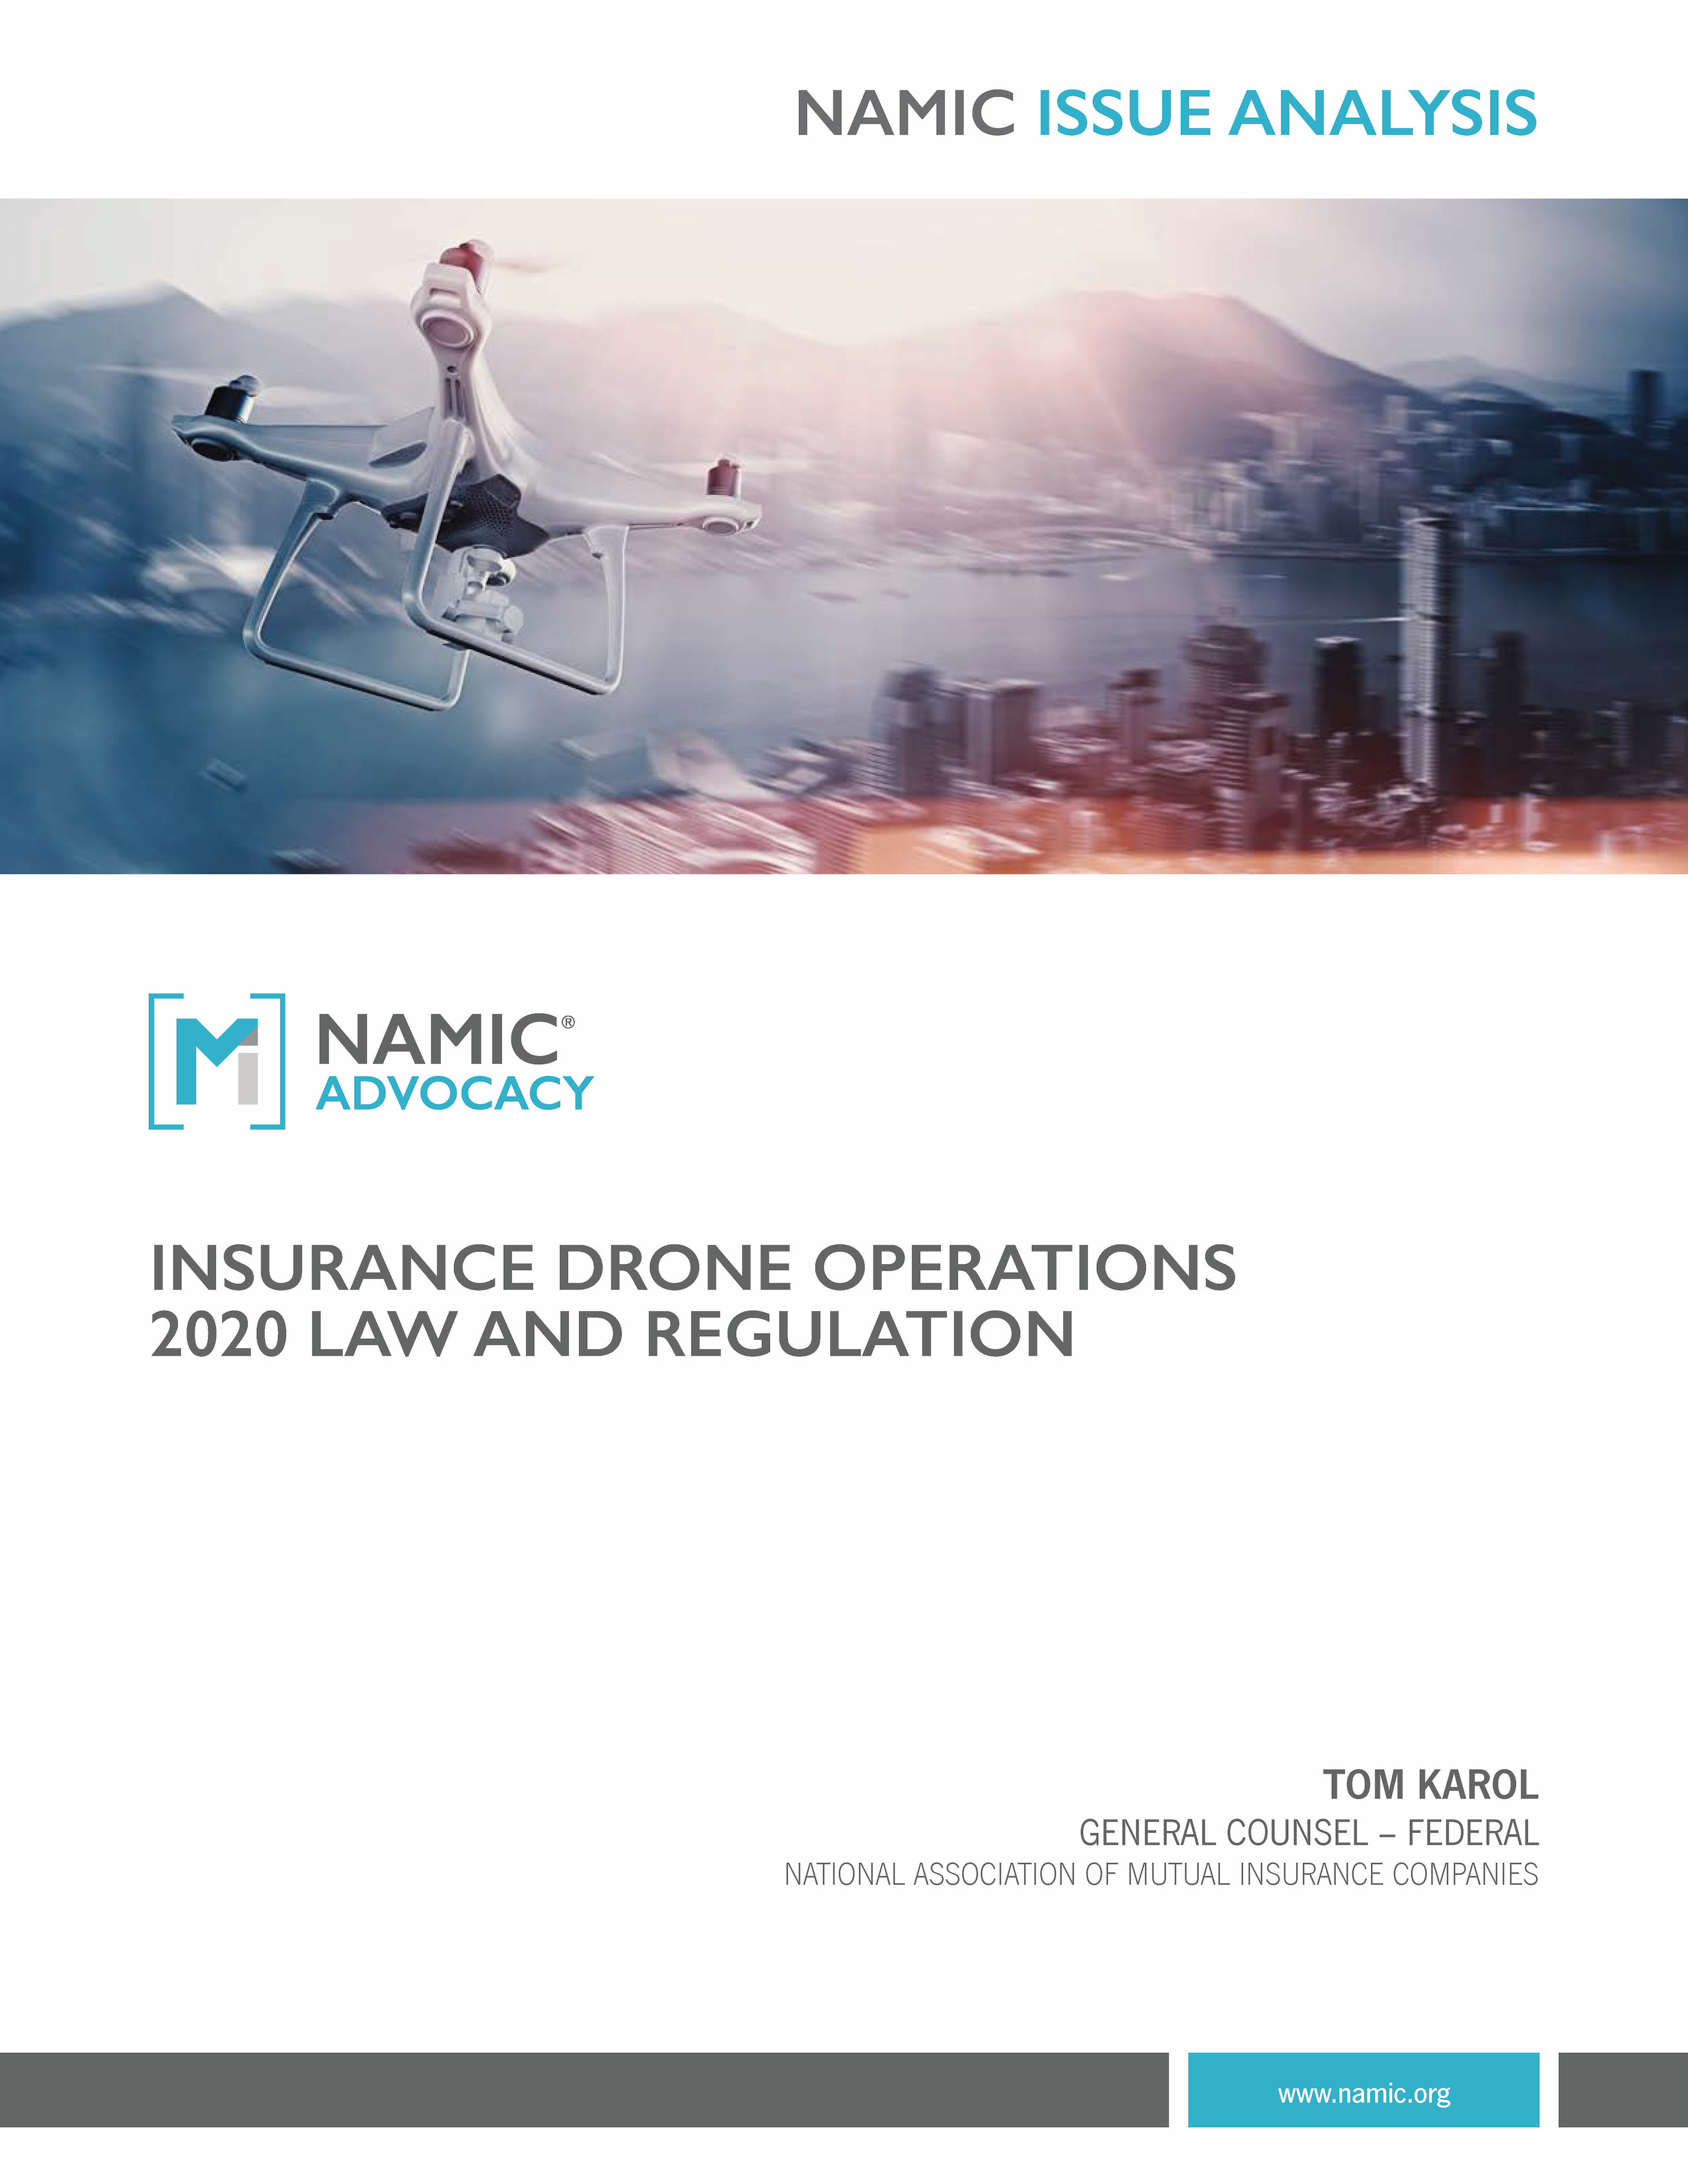 Insurance Drone Operations: 2020 Law and Regulation PDF